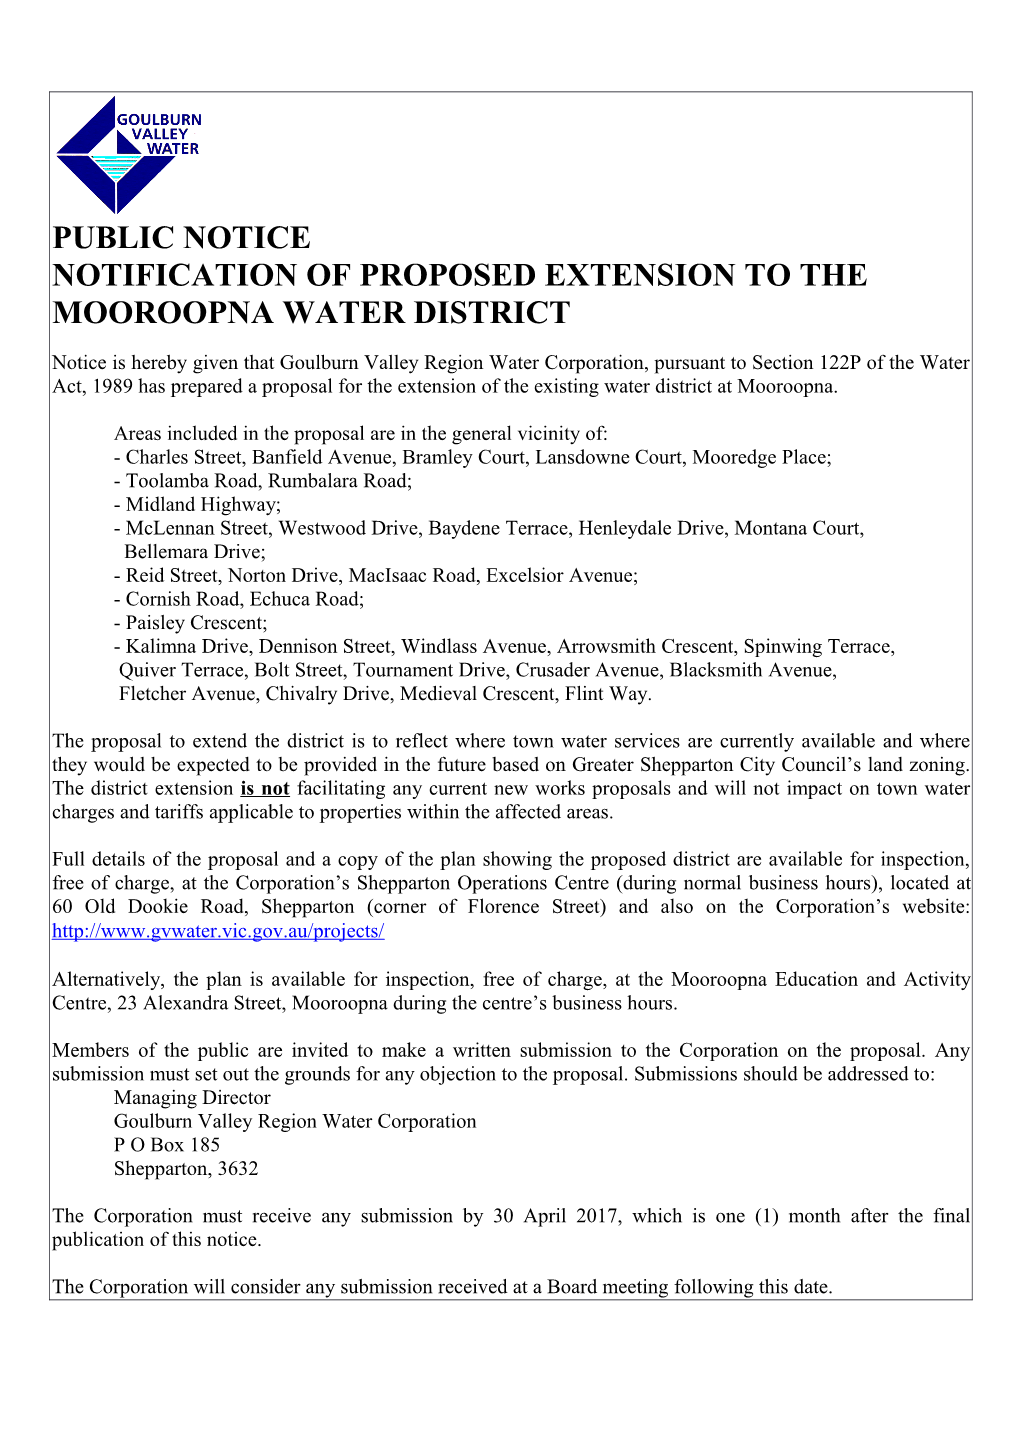 Notification of Proposed Extensionto the Mooroopnawater District